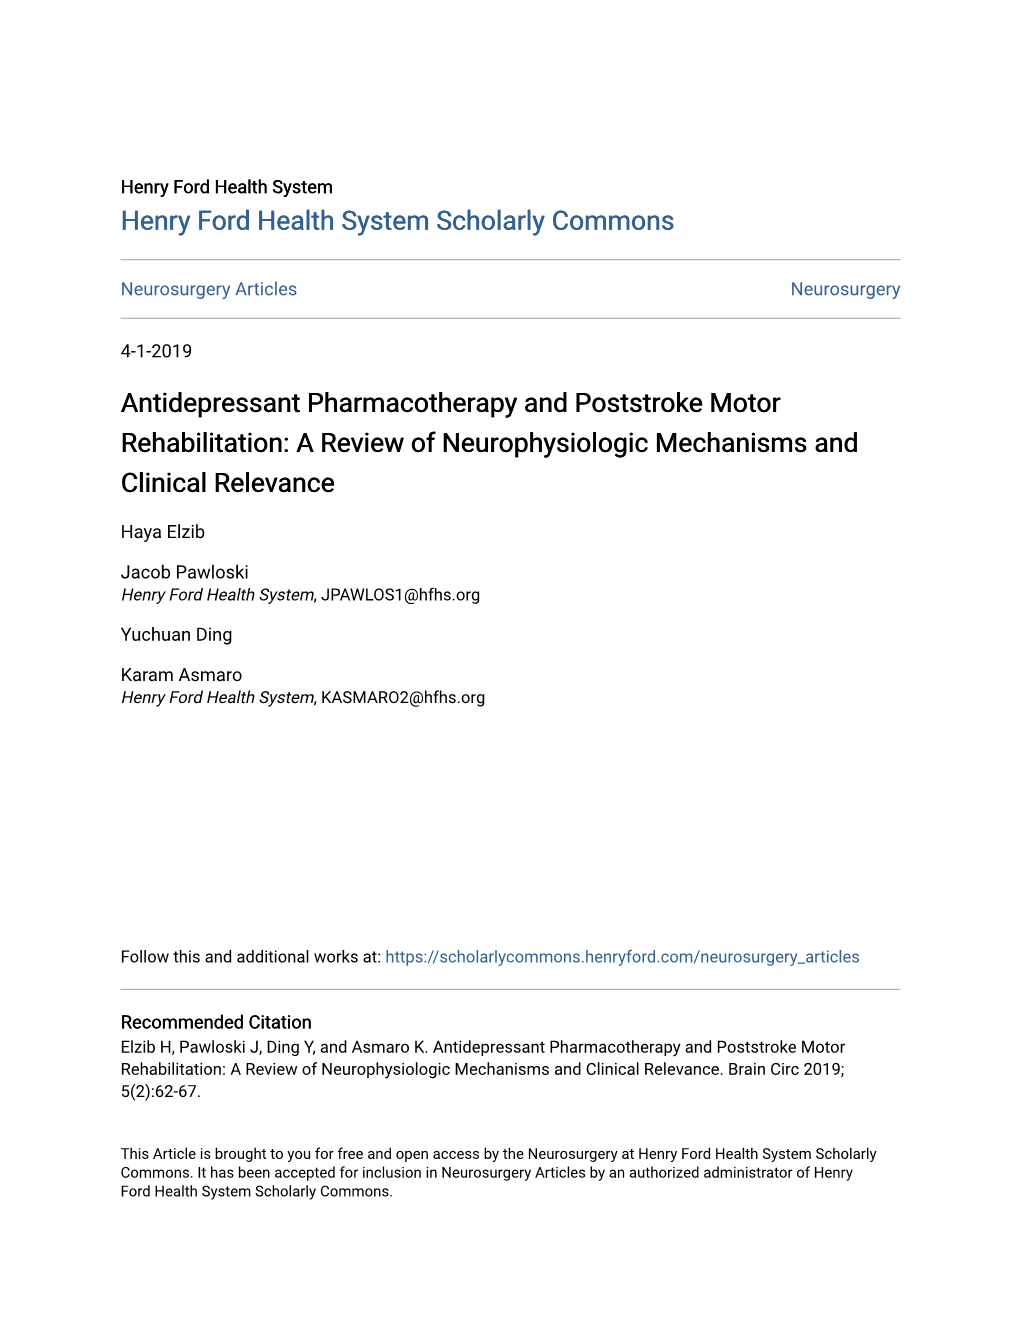 Antidepressant Pharmacotherapy and Poststroke Motor Rehabilitation: a Review of Neurophysiologic Mechanisms and Clinical Relevance